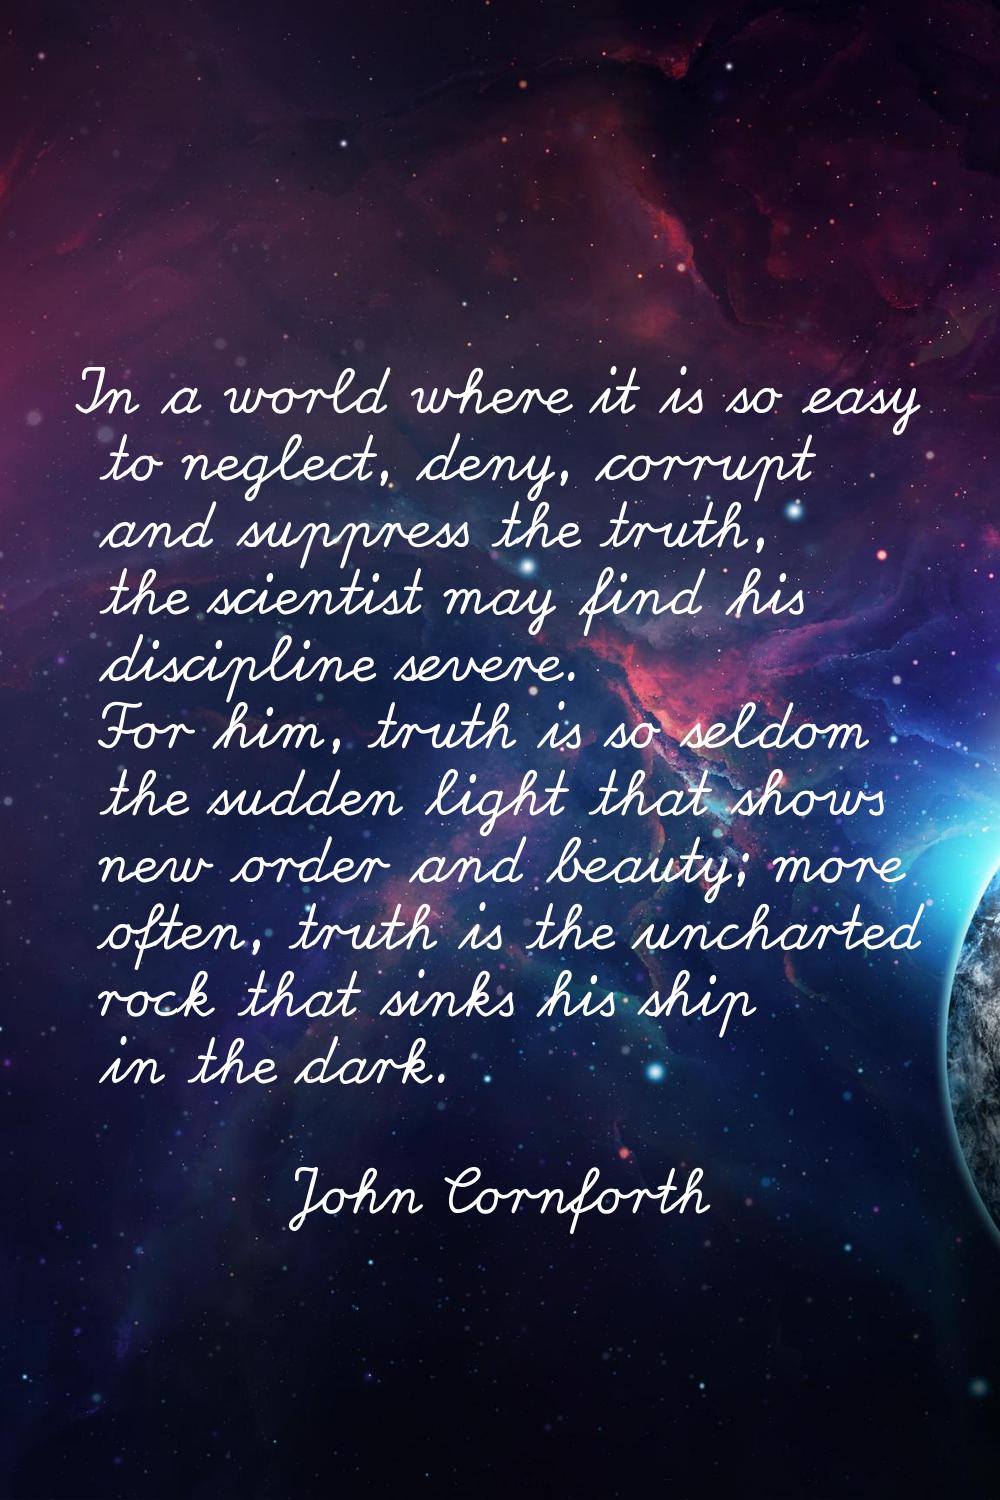 In a world where it is so easy to neglect, deny, corrupt and suppress the truth, the scientist may 